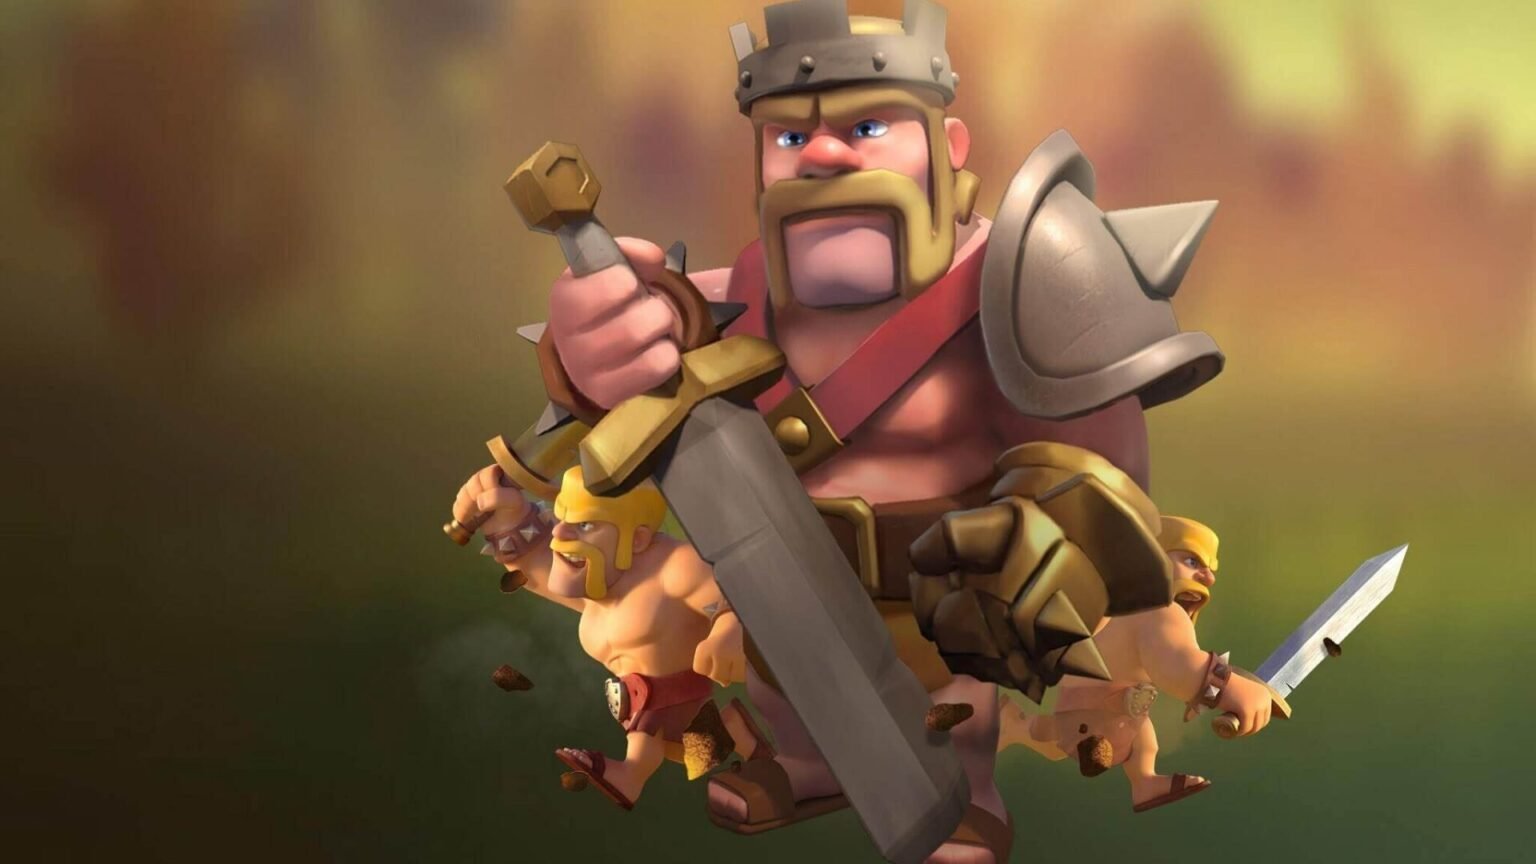 Best Barbarian King Equipment in Clash of Clans